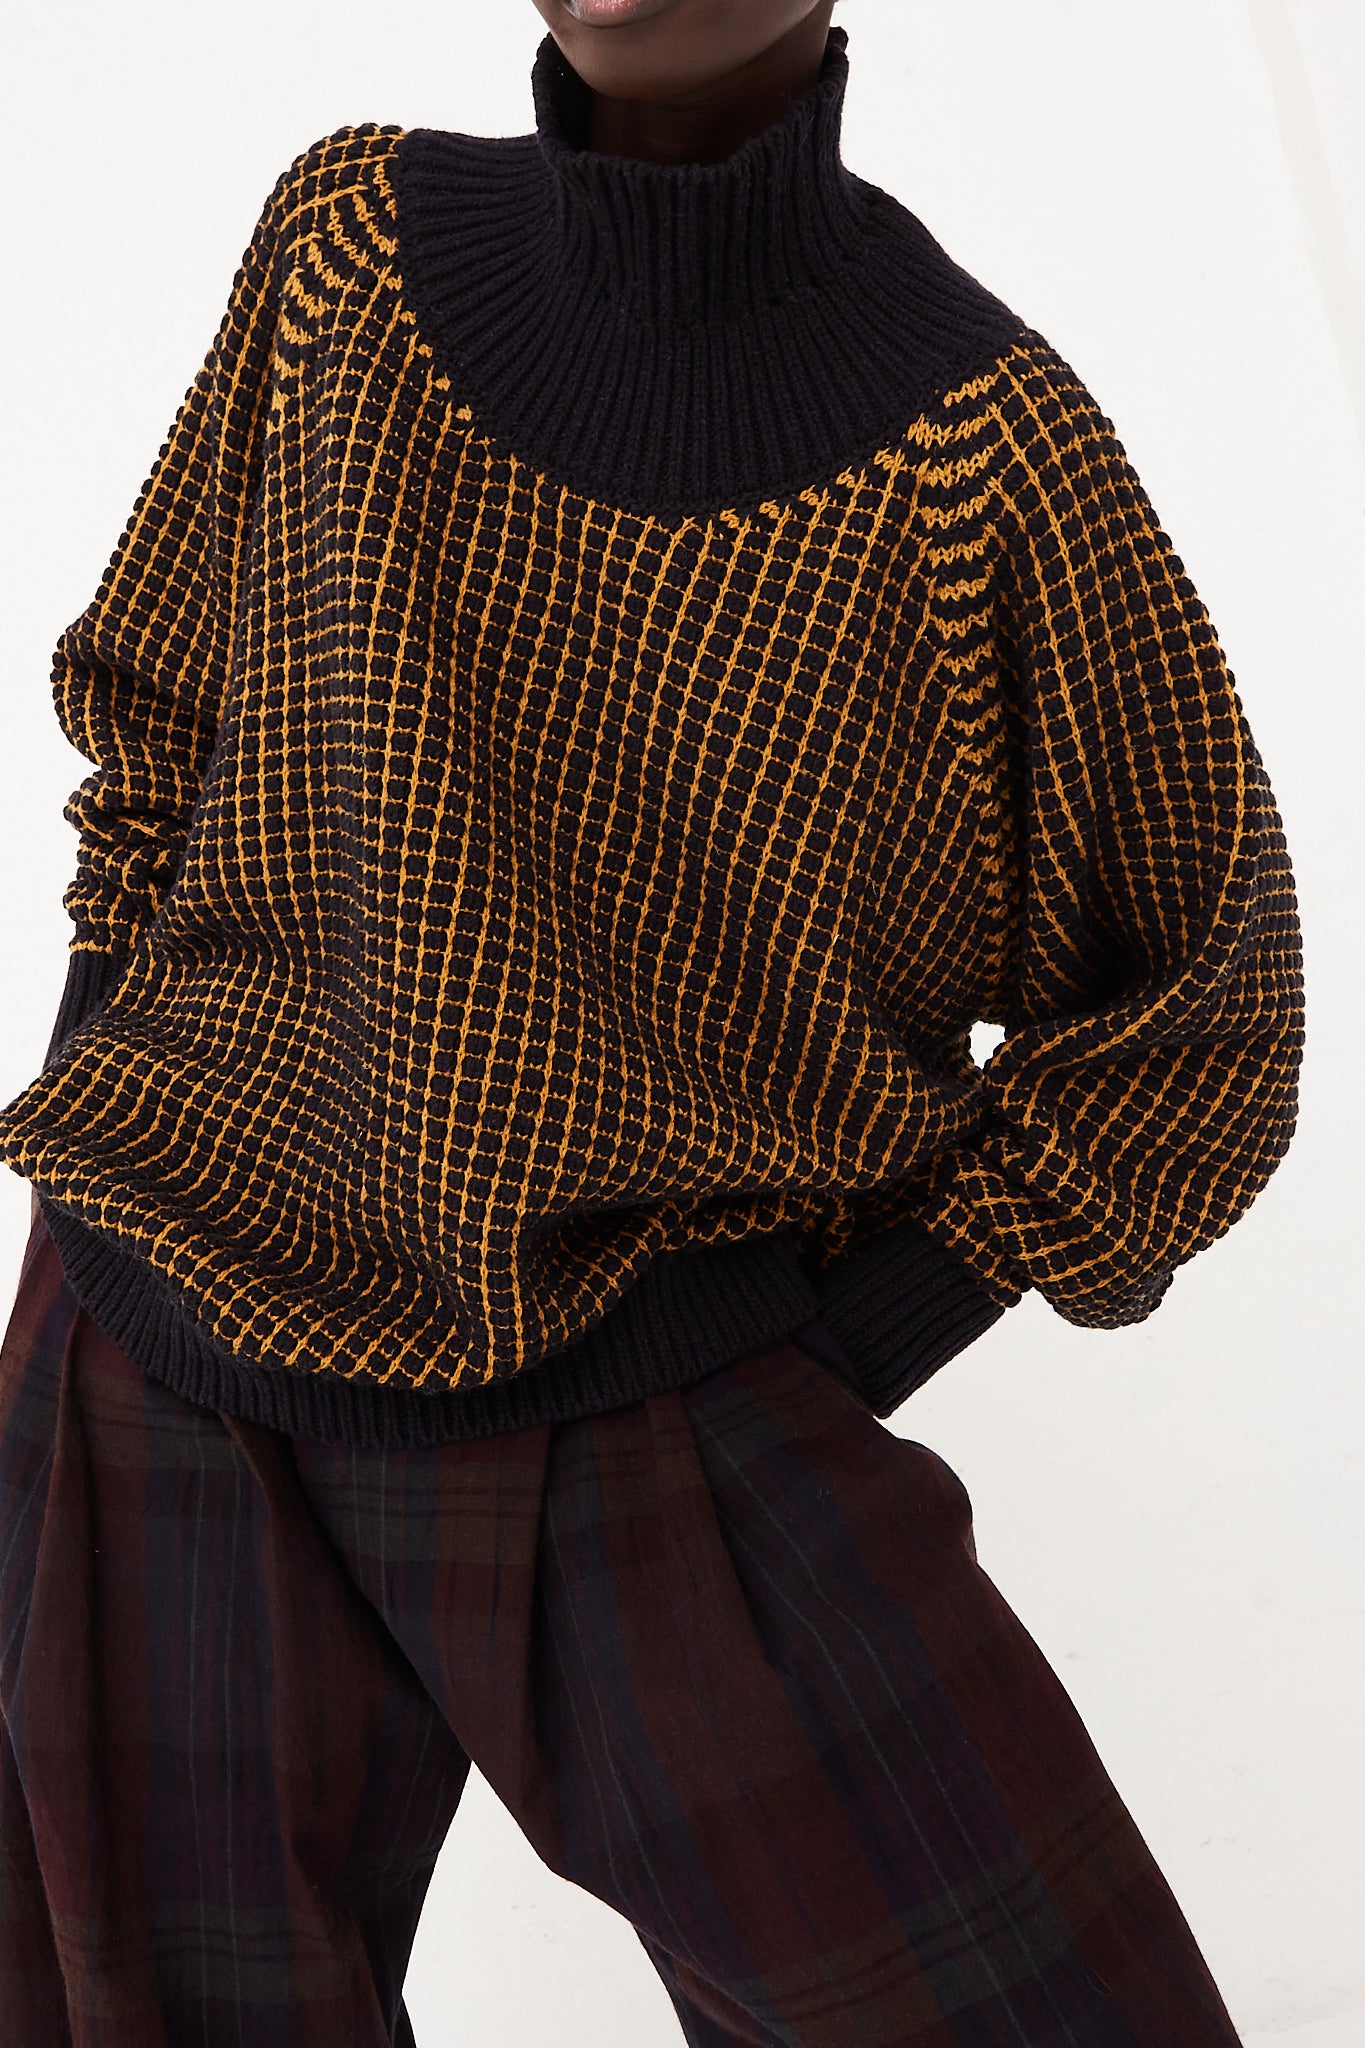 A woman is posing for a photo wearing the Jan-Jan Van Essche Turtleneck Sweater in Pitch Black Gold Lalin and plaid pants, showcasing the stylish knit design of her outfit.